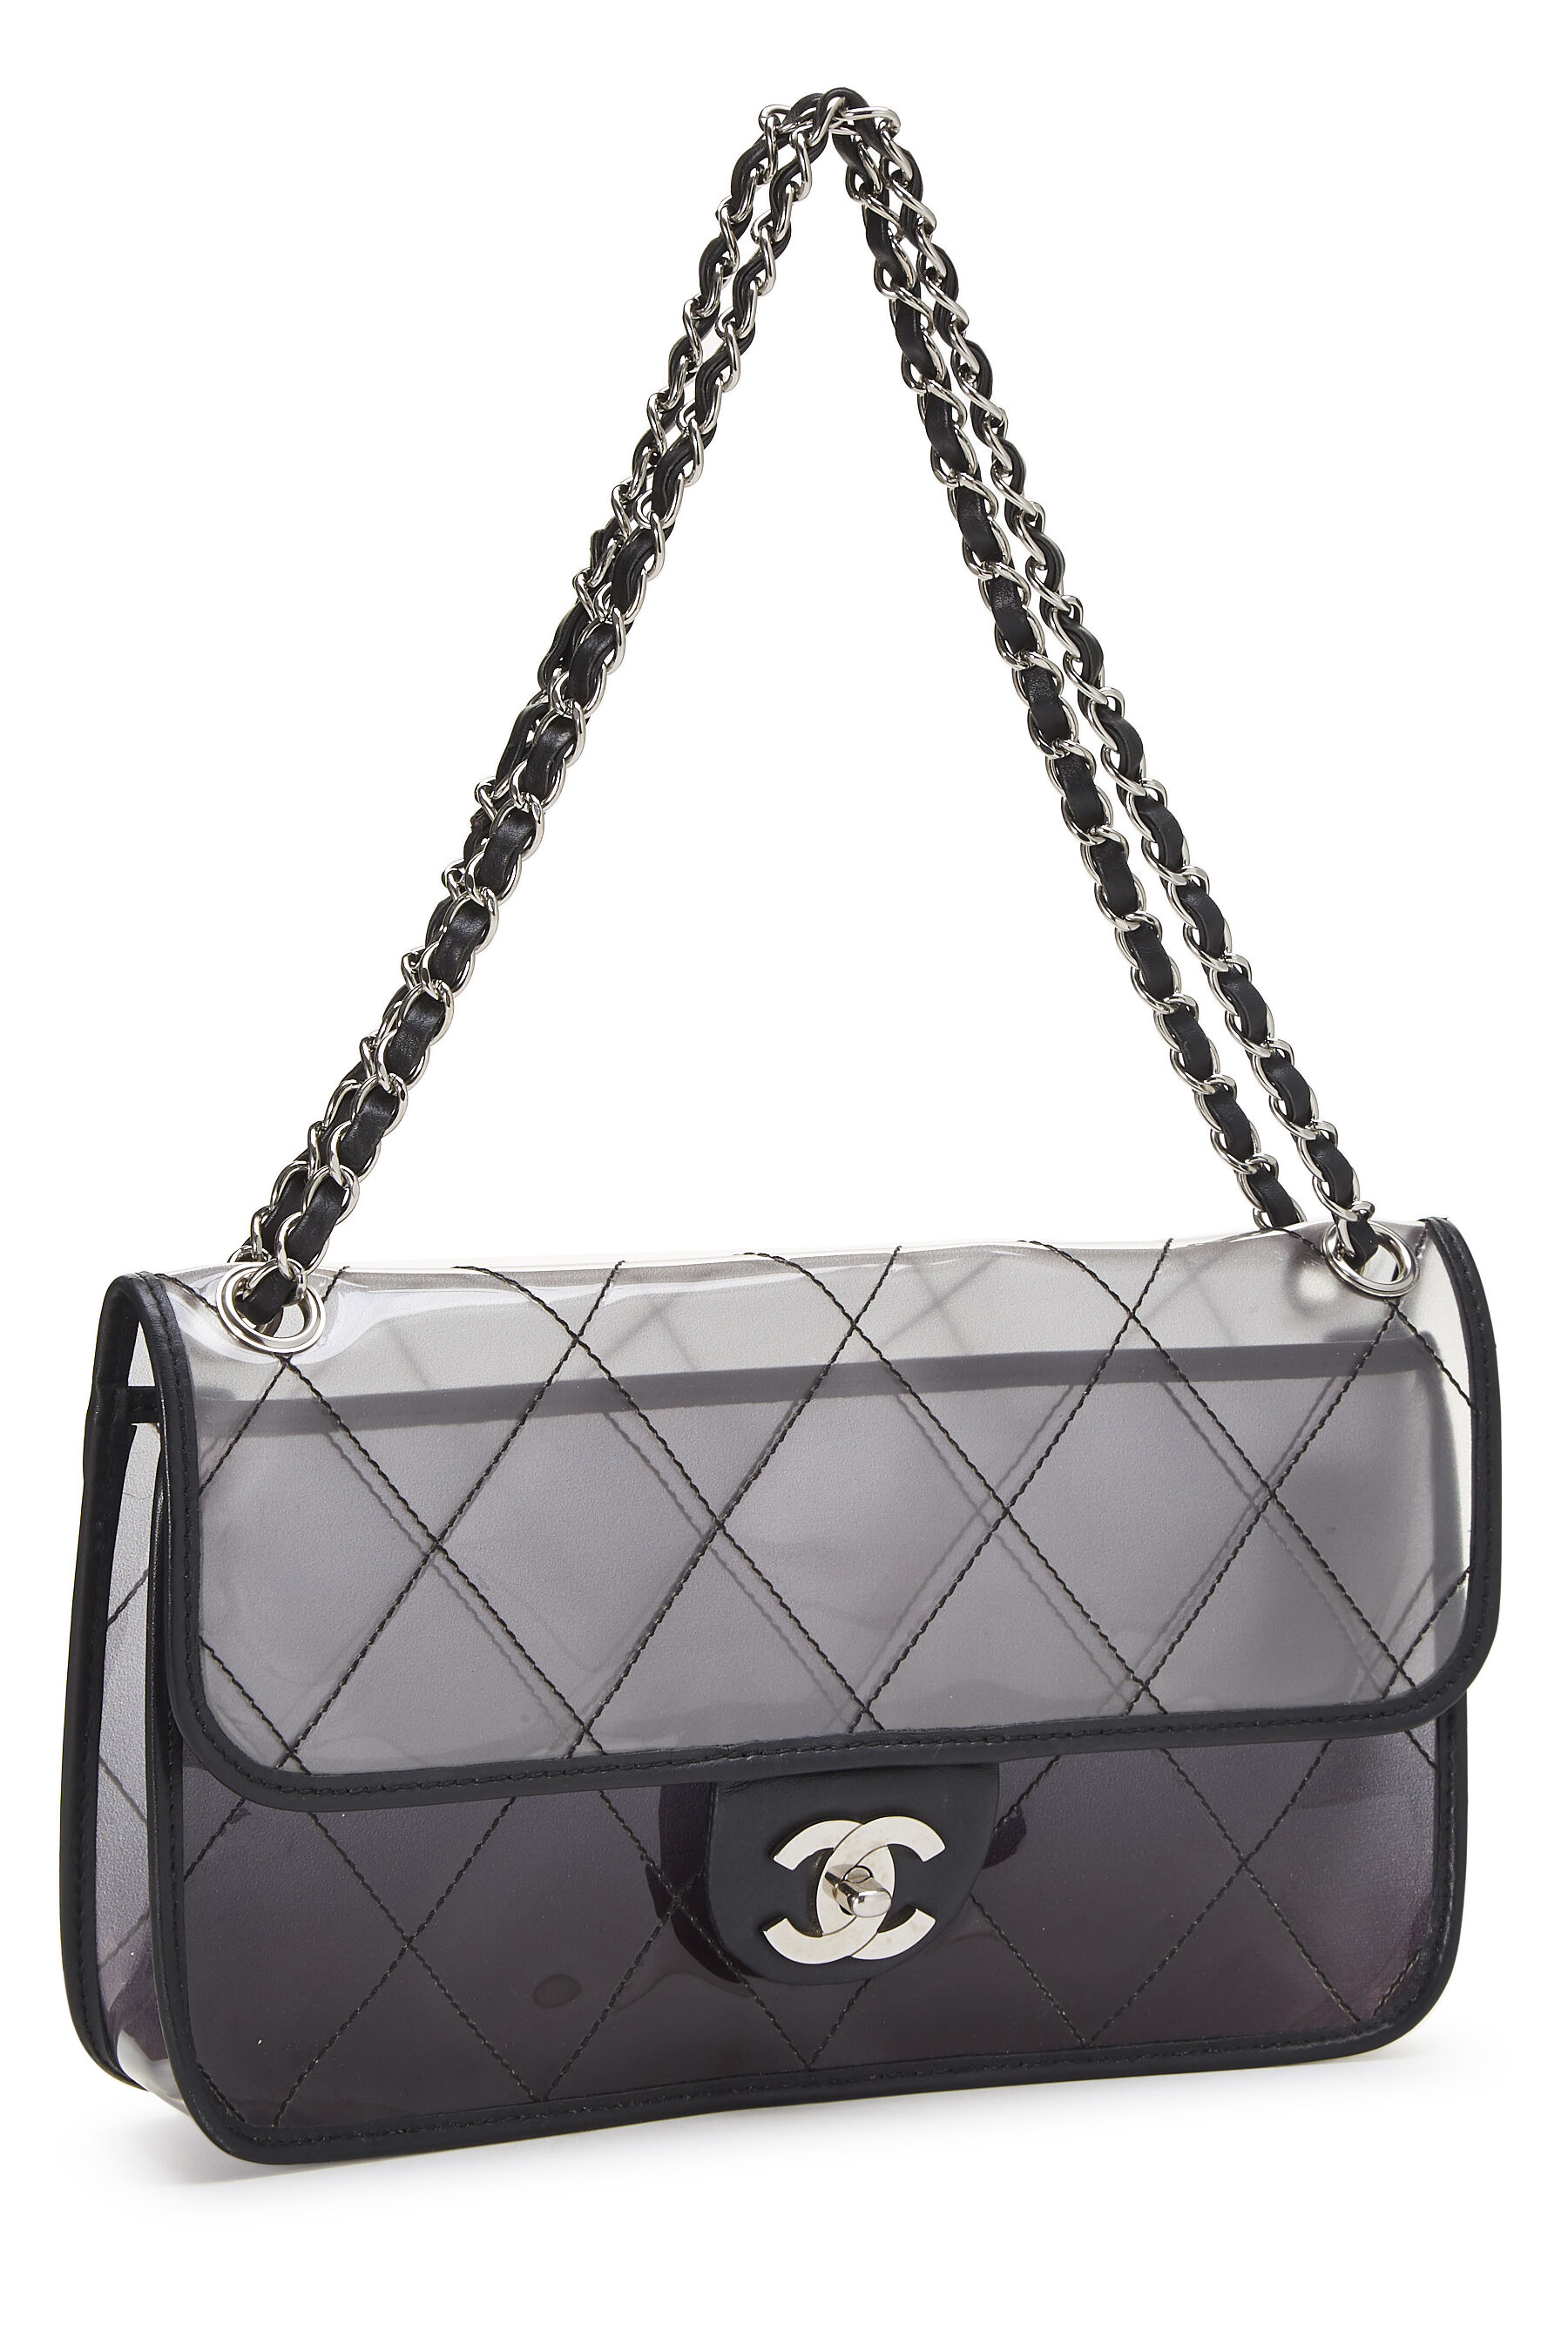 CHANEL CC BOX Flap Bag Quilted Calfskin Small-very Roomy $3,495.00